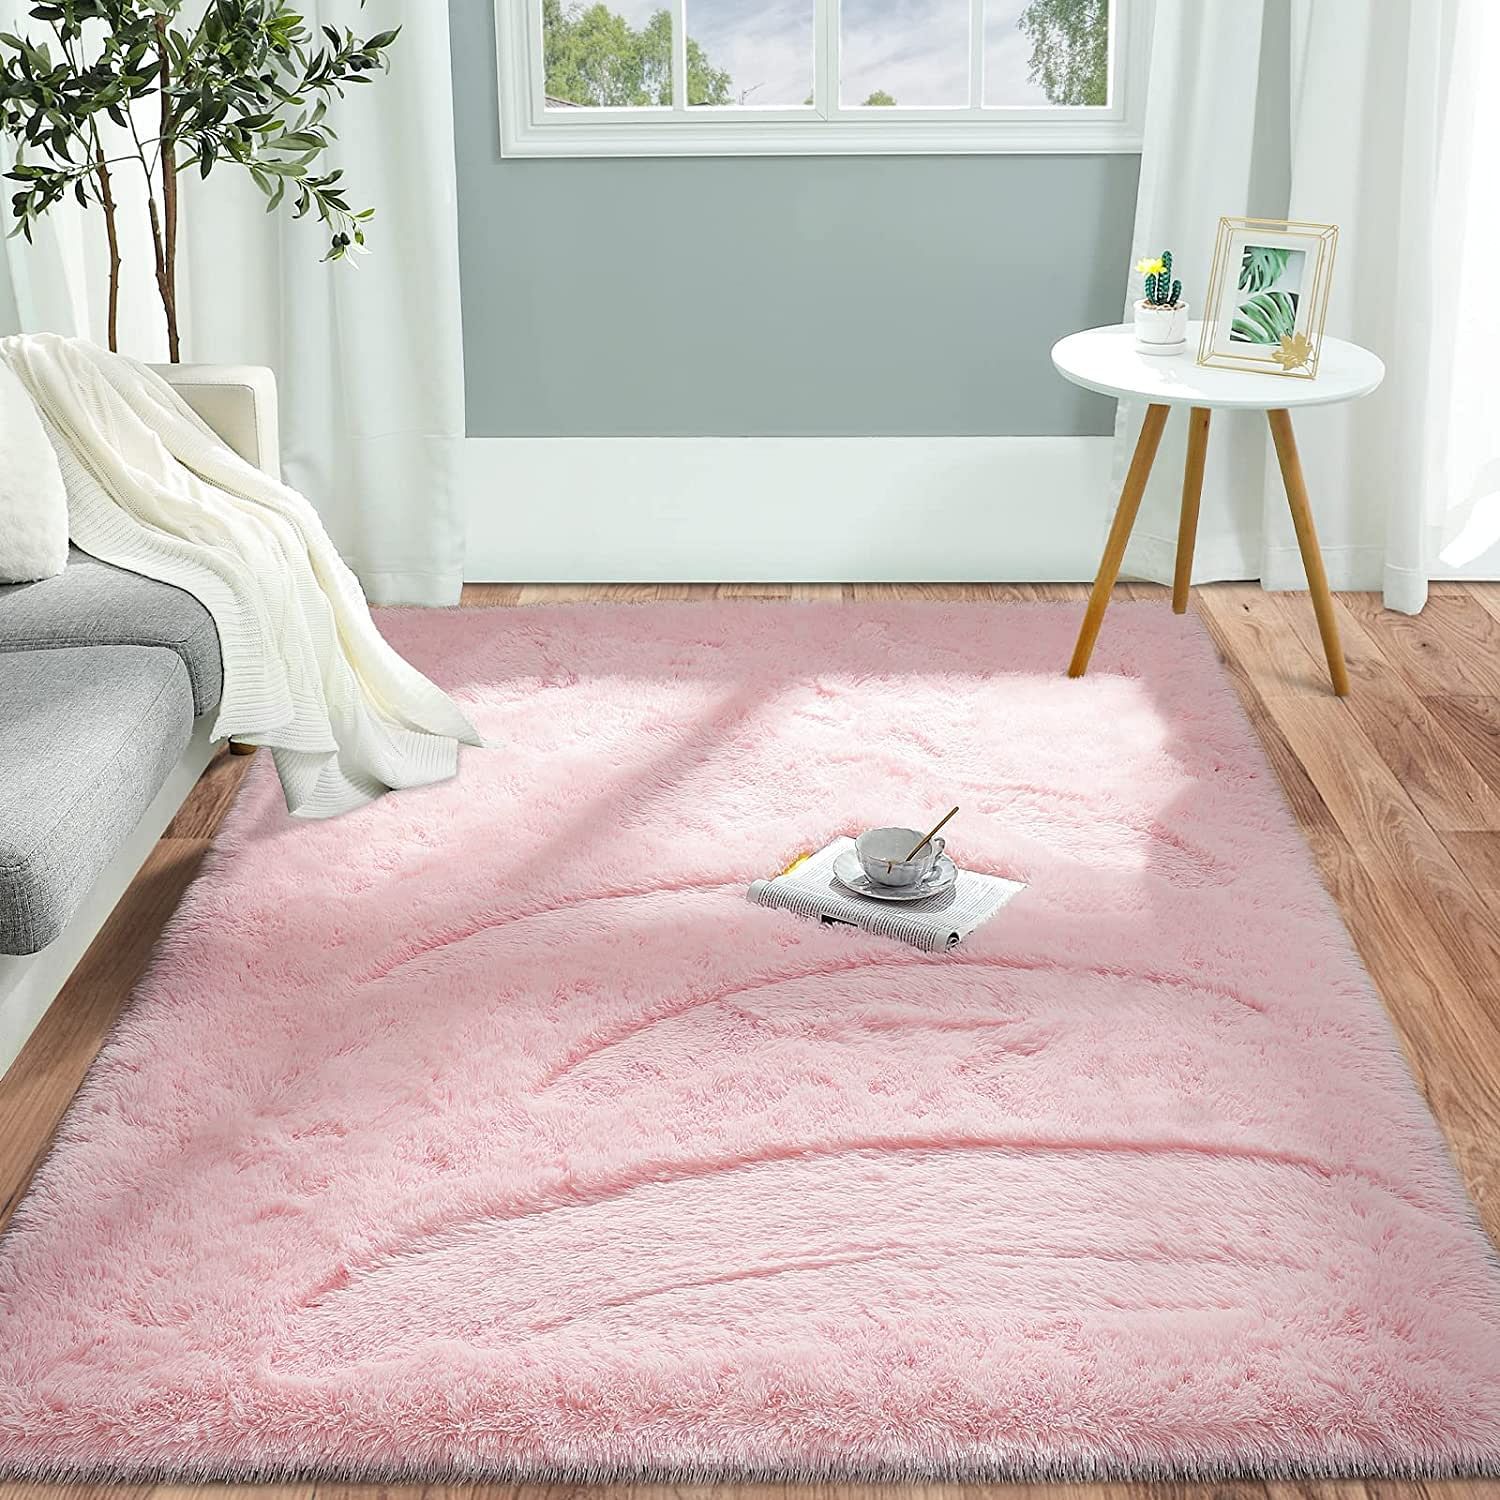 Pettop Fluffy Shaggy Area Rugs For Girls Bedroom,3x5 | Ubuy India Intended For Light Pink Rugs (View 9 of 15)